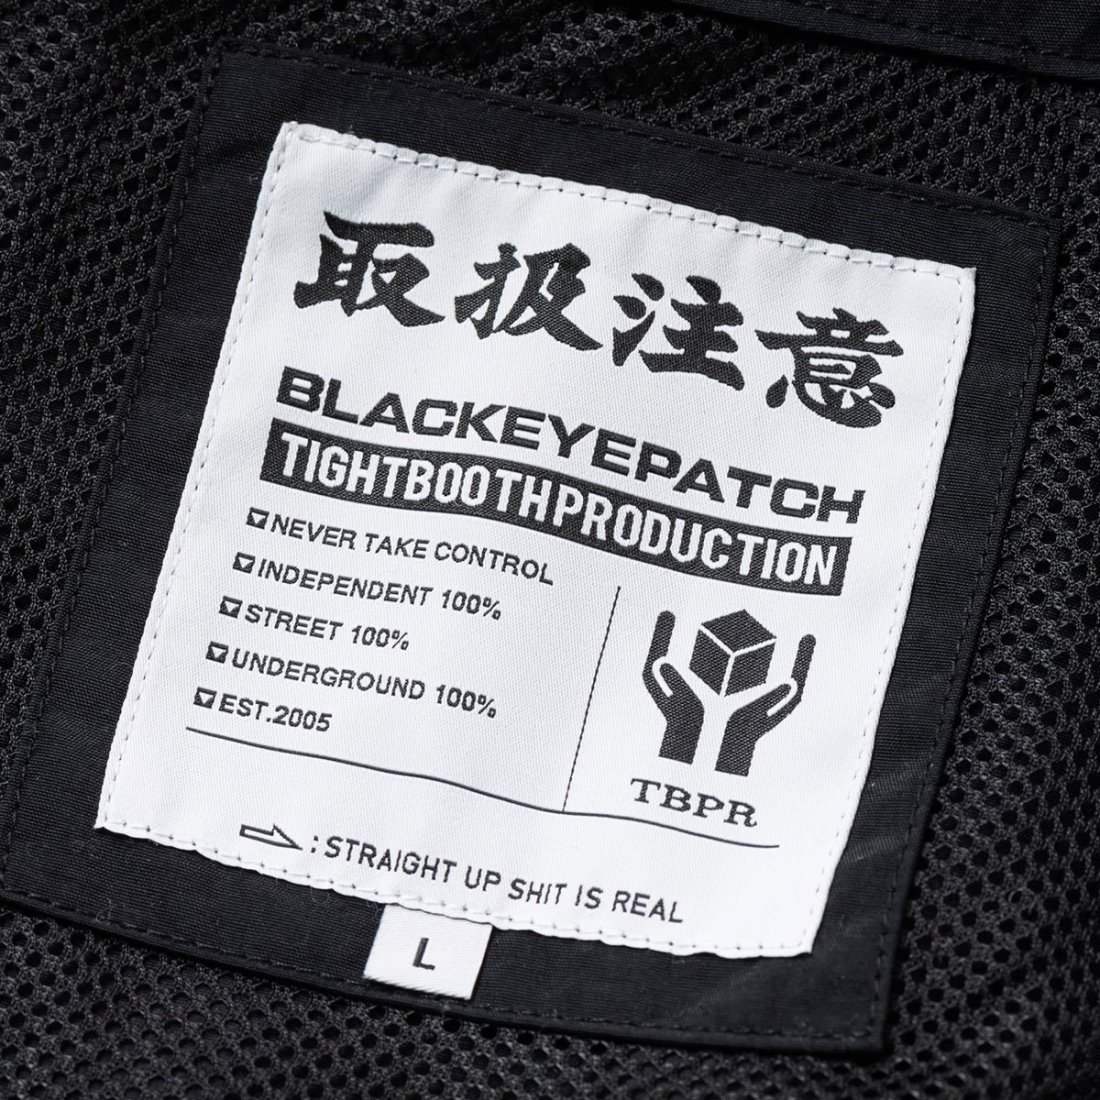 Tight Booth Production Black Eye Patch ワークパンツ